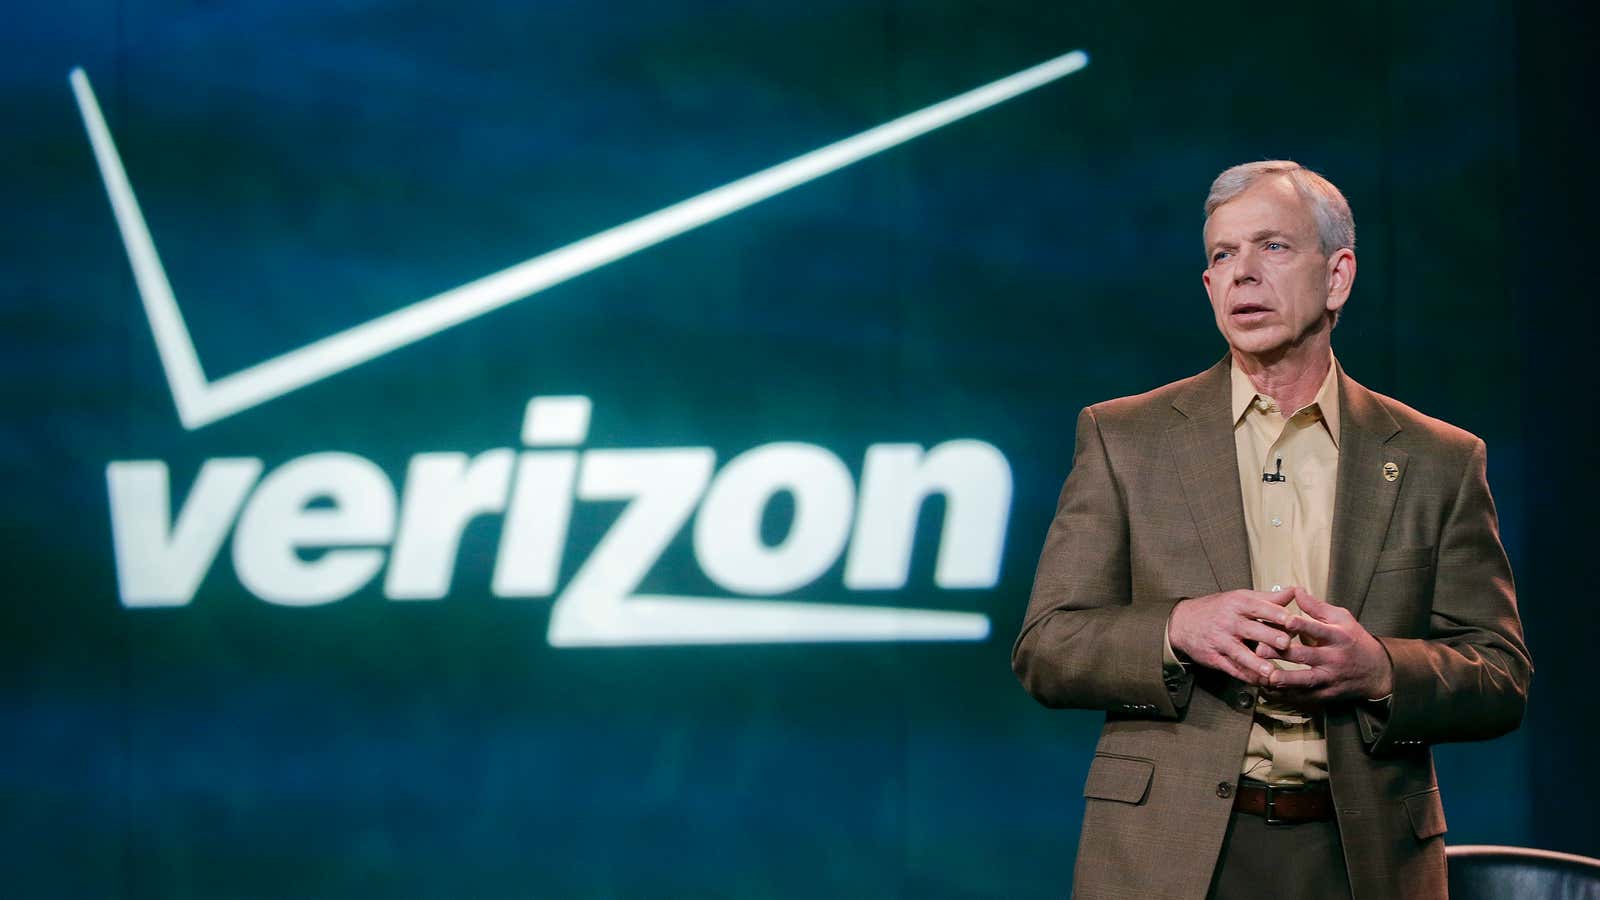 Verizon CEO Lowell McAdam has seen the future, and it’s chockablock with iPhones.